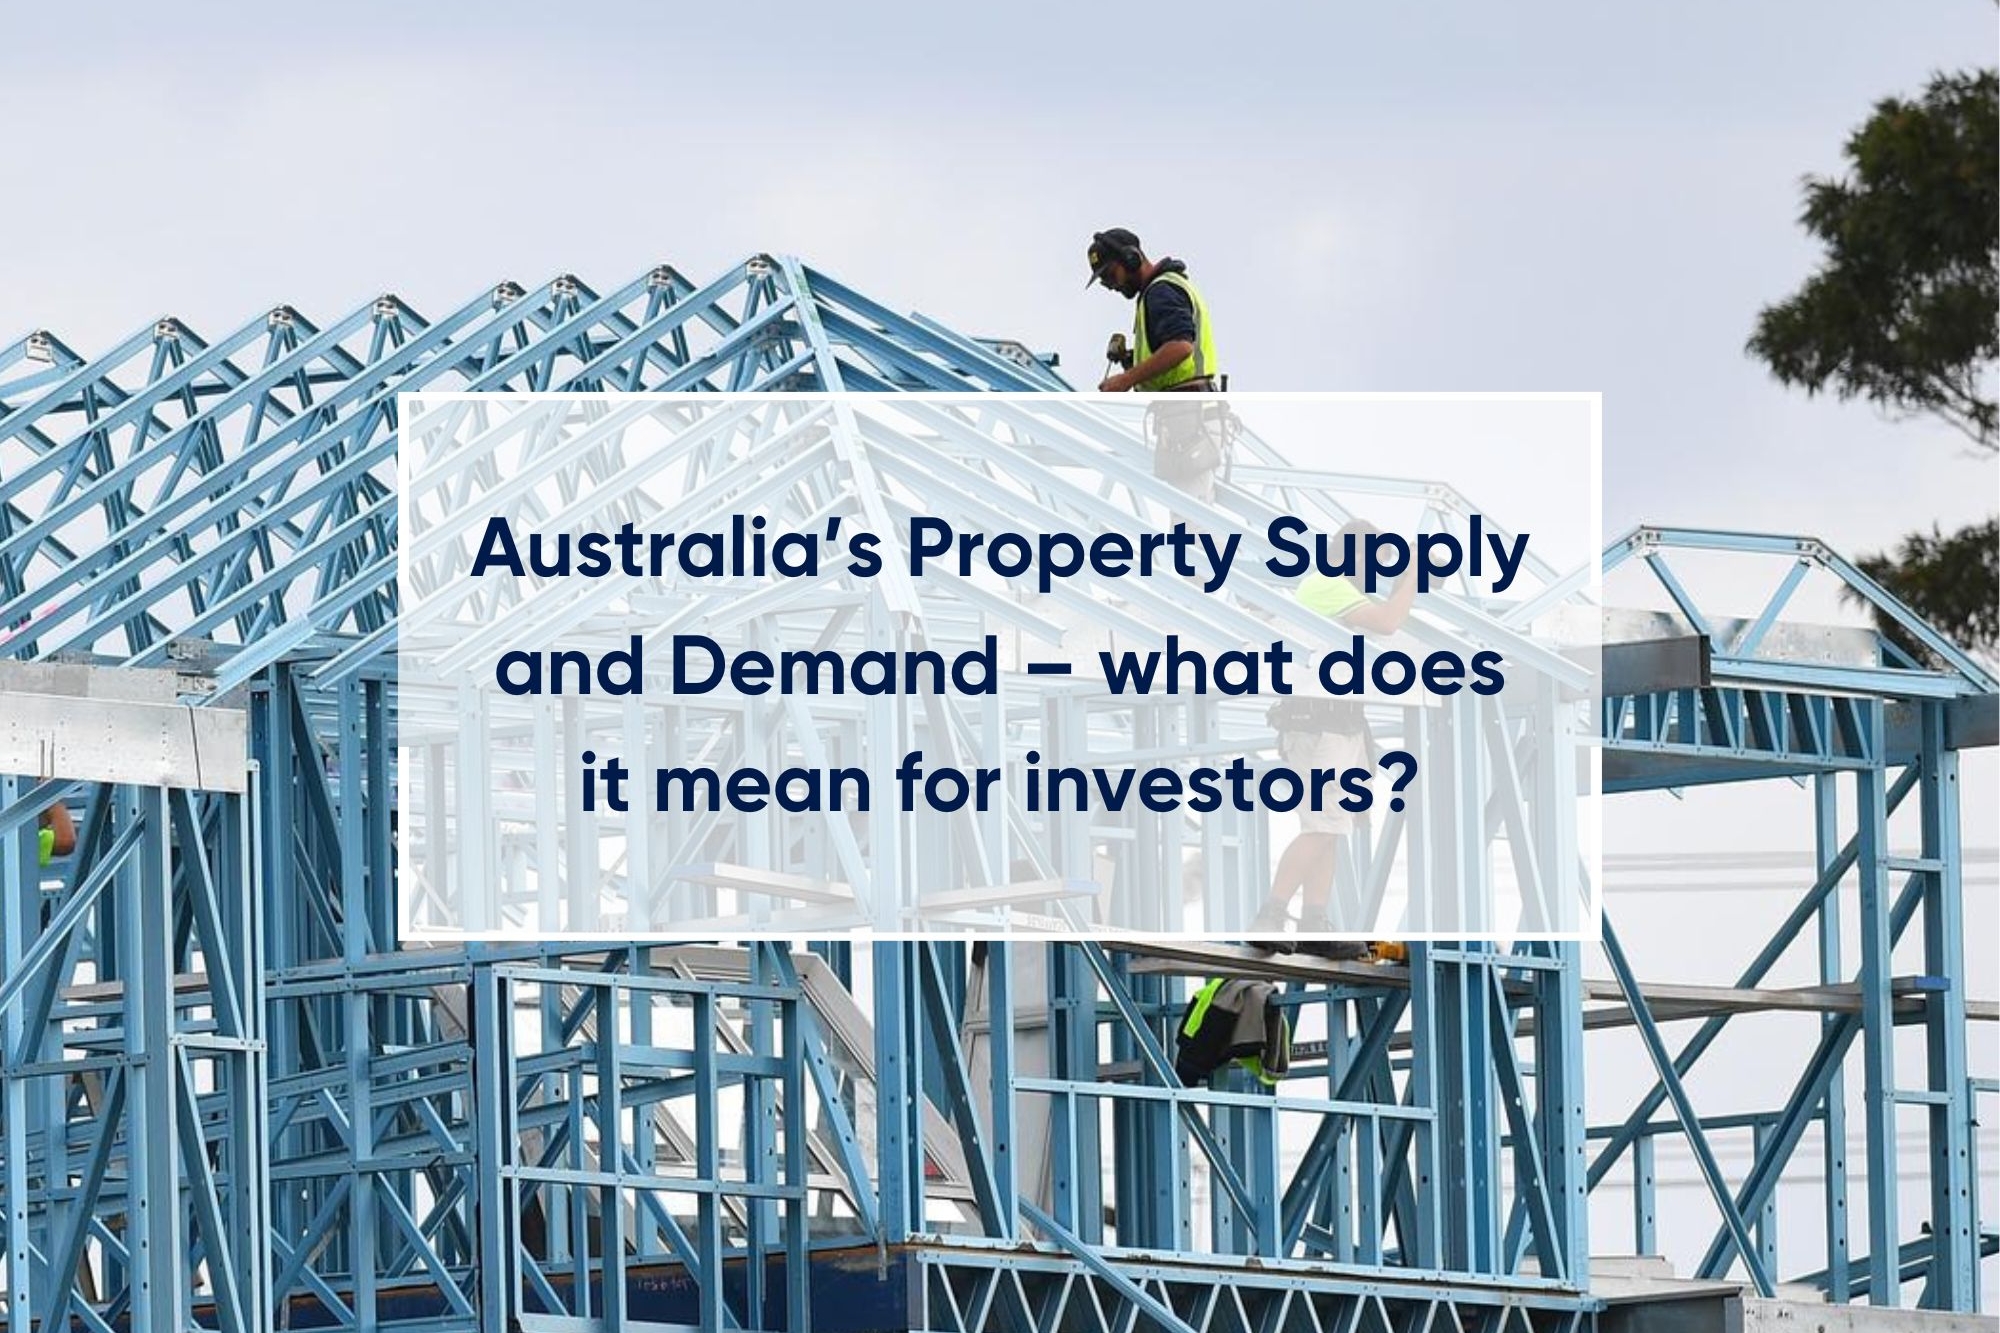 Australia’s Property Supply and Demand – what does it mean for investors?